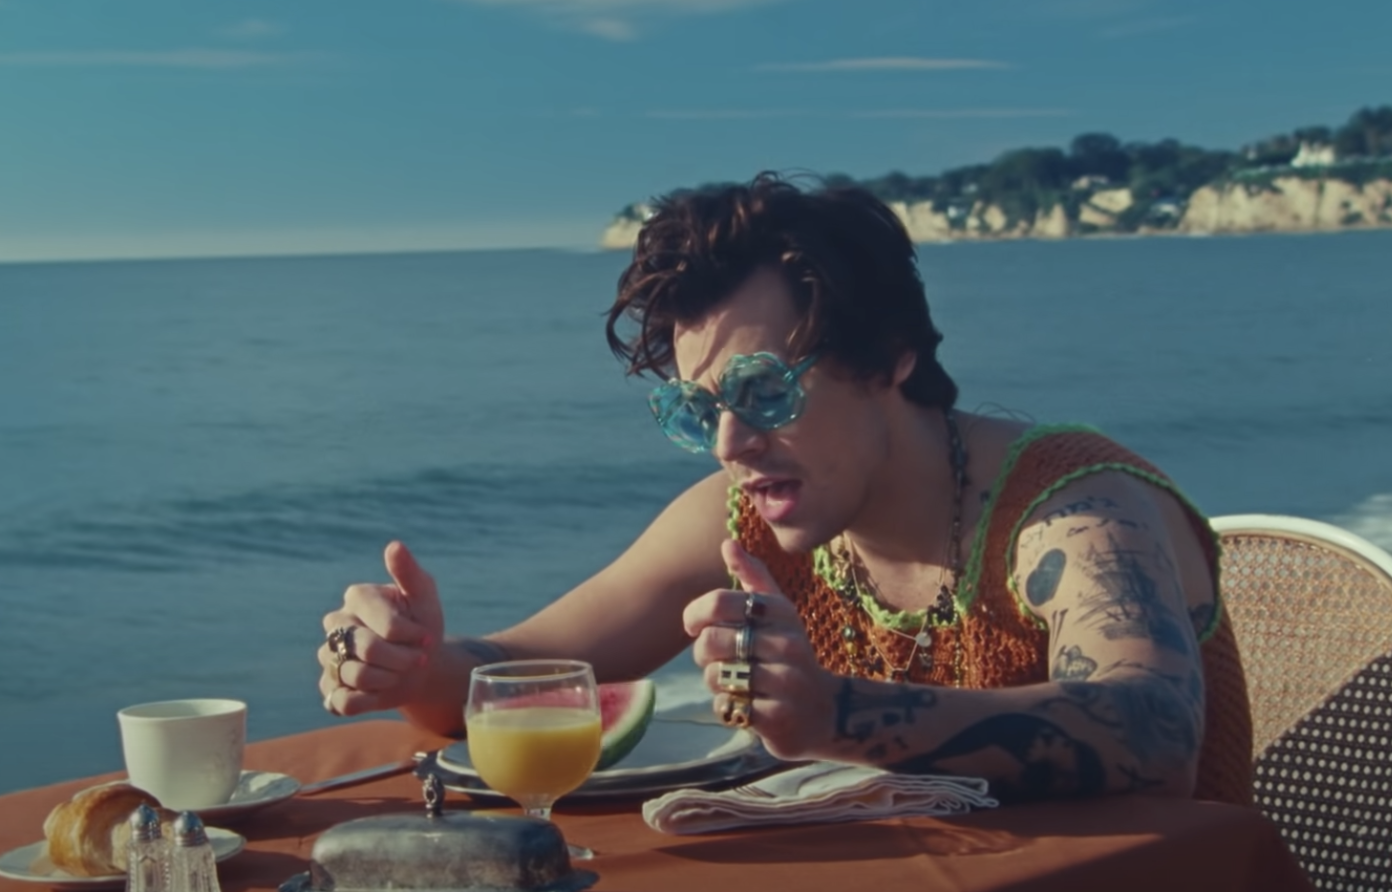 Harry sitting at a table with a plate of watermelon in front of him in a scene from the music video